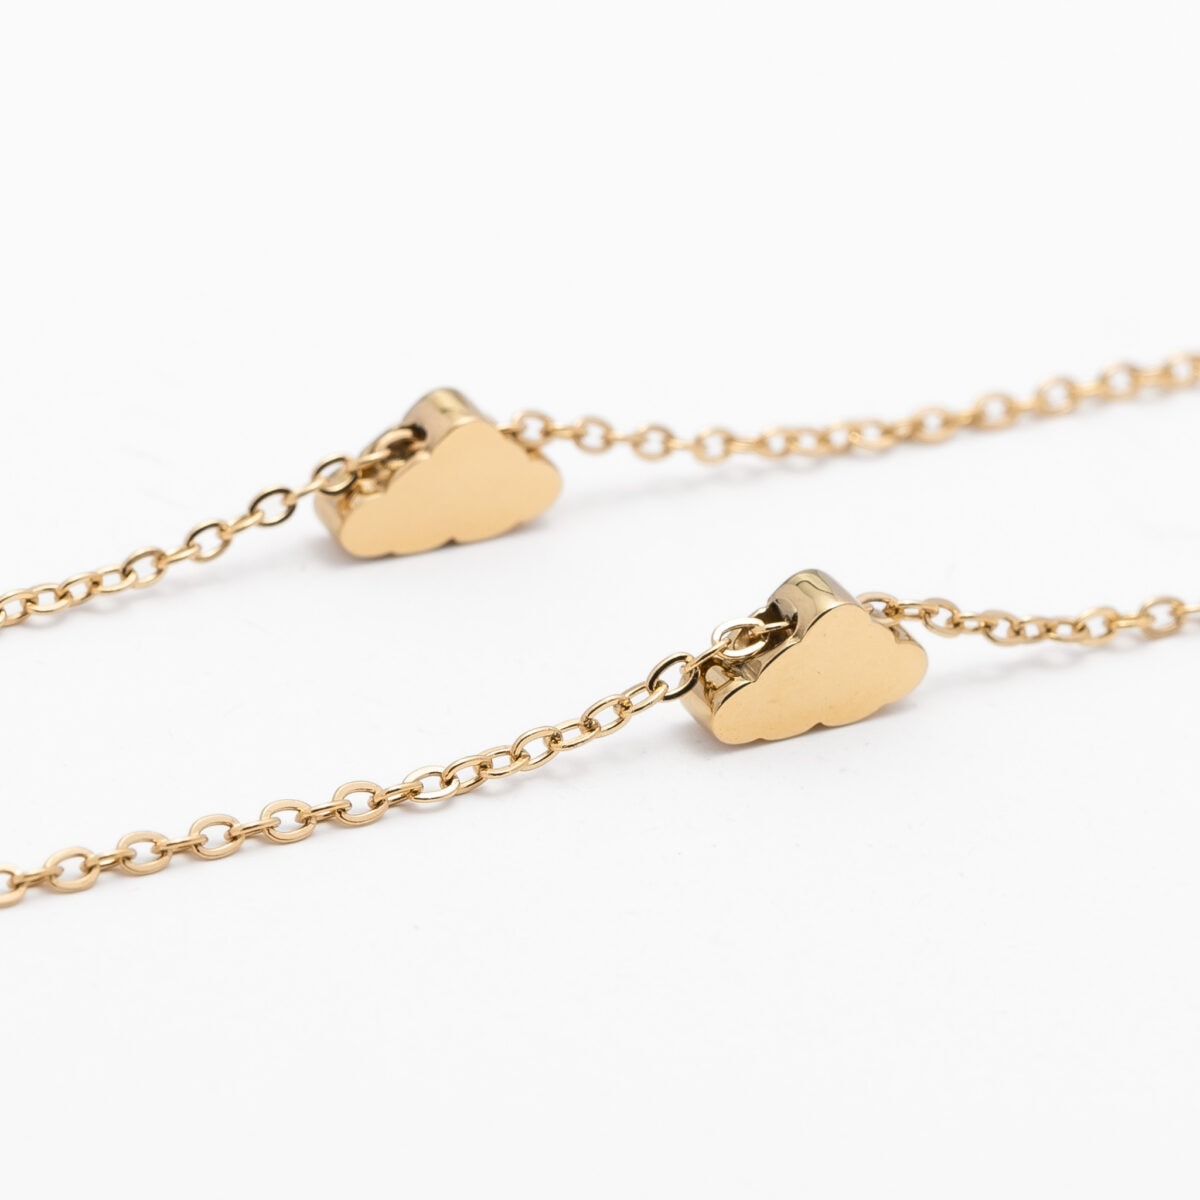 https://m.clubbella.co/product/volare-cloud-gold-charm-bracelet/ Volare Cloud Gold Charm 5